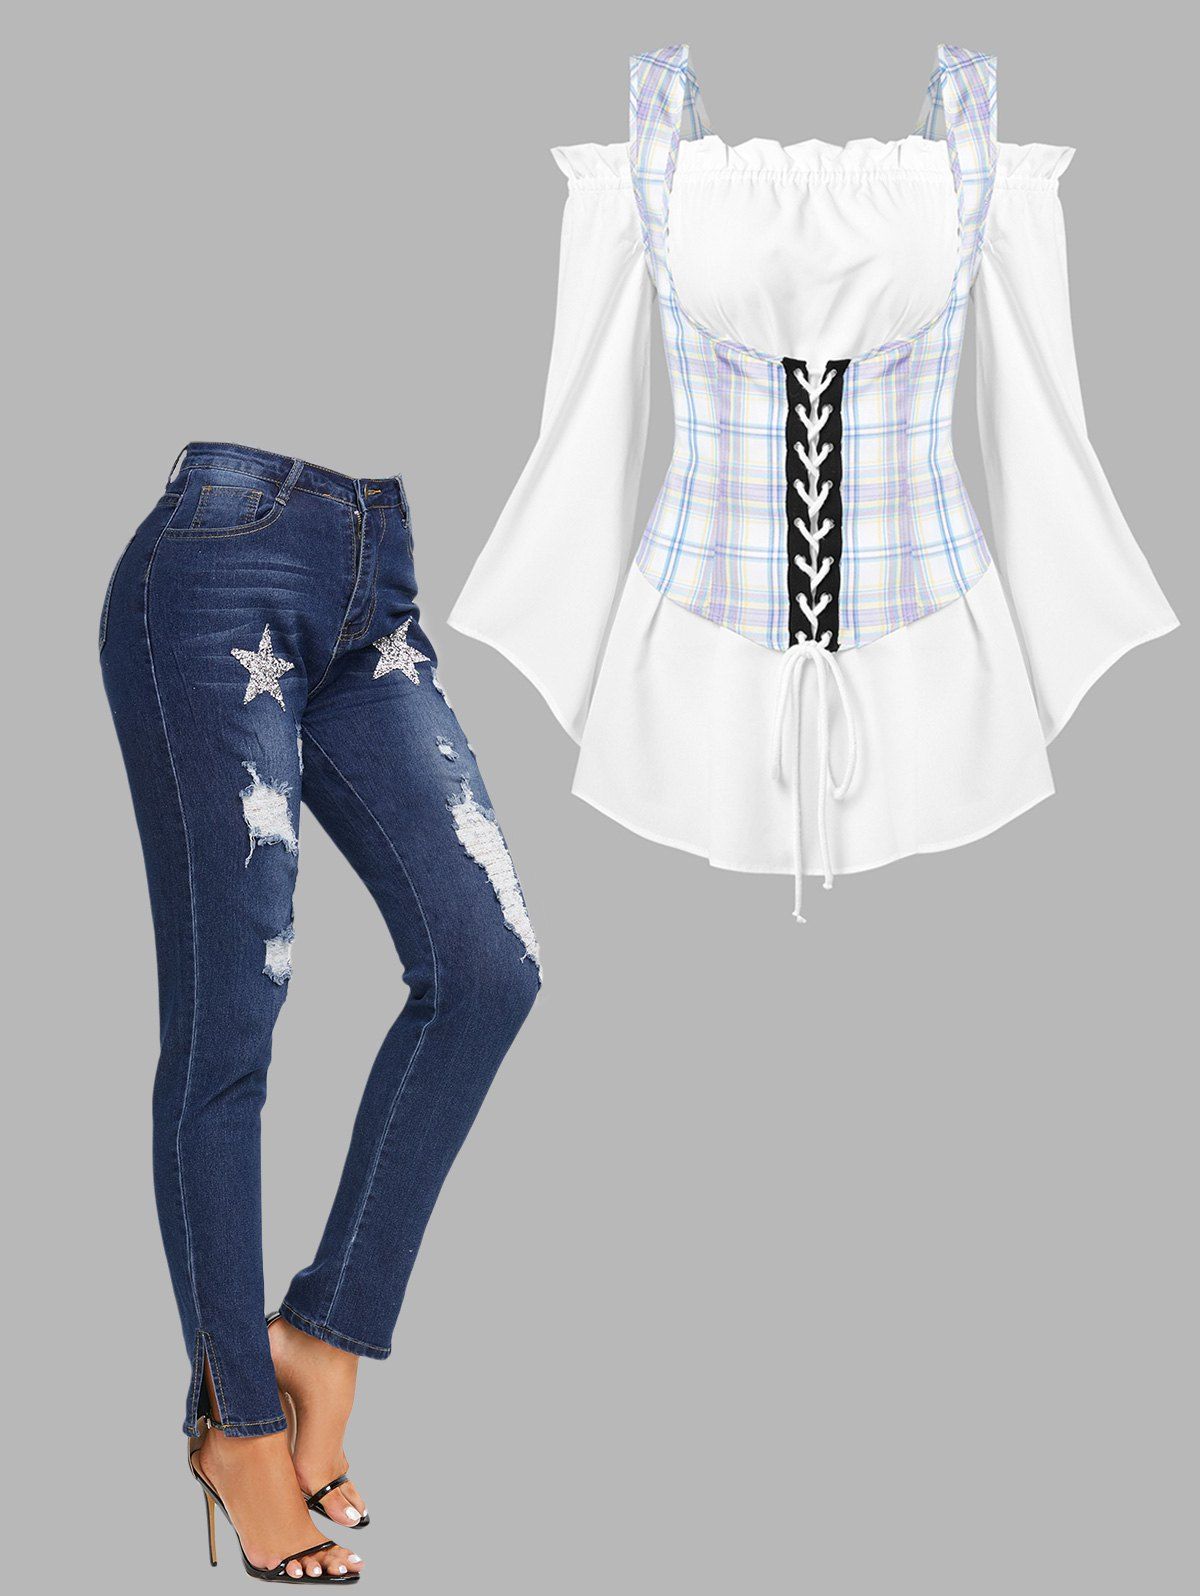 Ruffled Blouse Plaid Lace Up Corset Top Twinset and Star Distressed Skinny Jeans Outfit - multicolor S